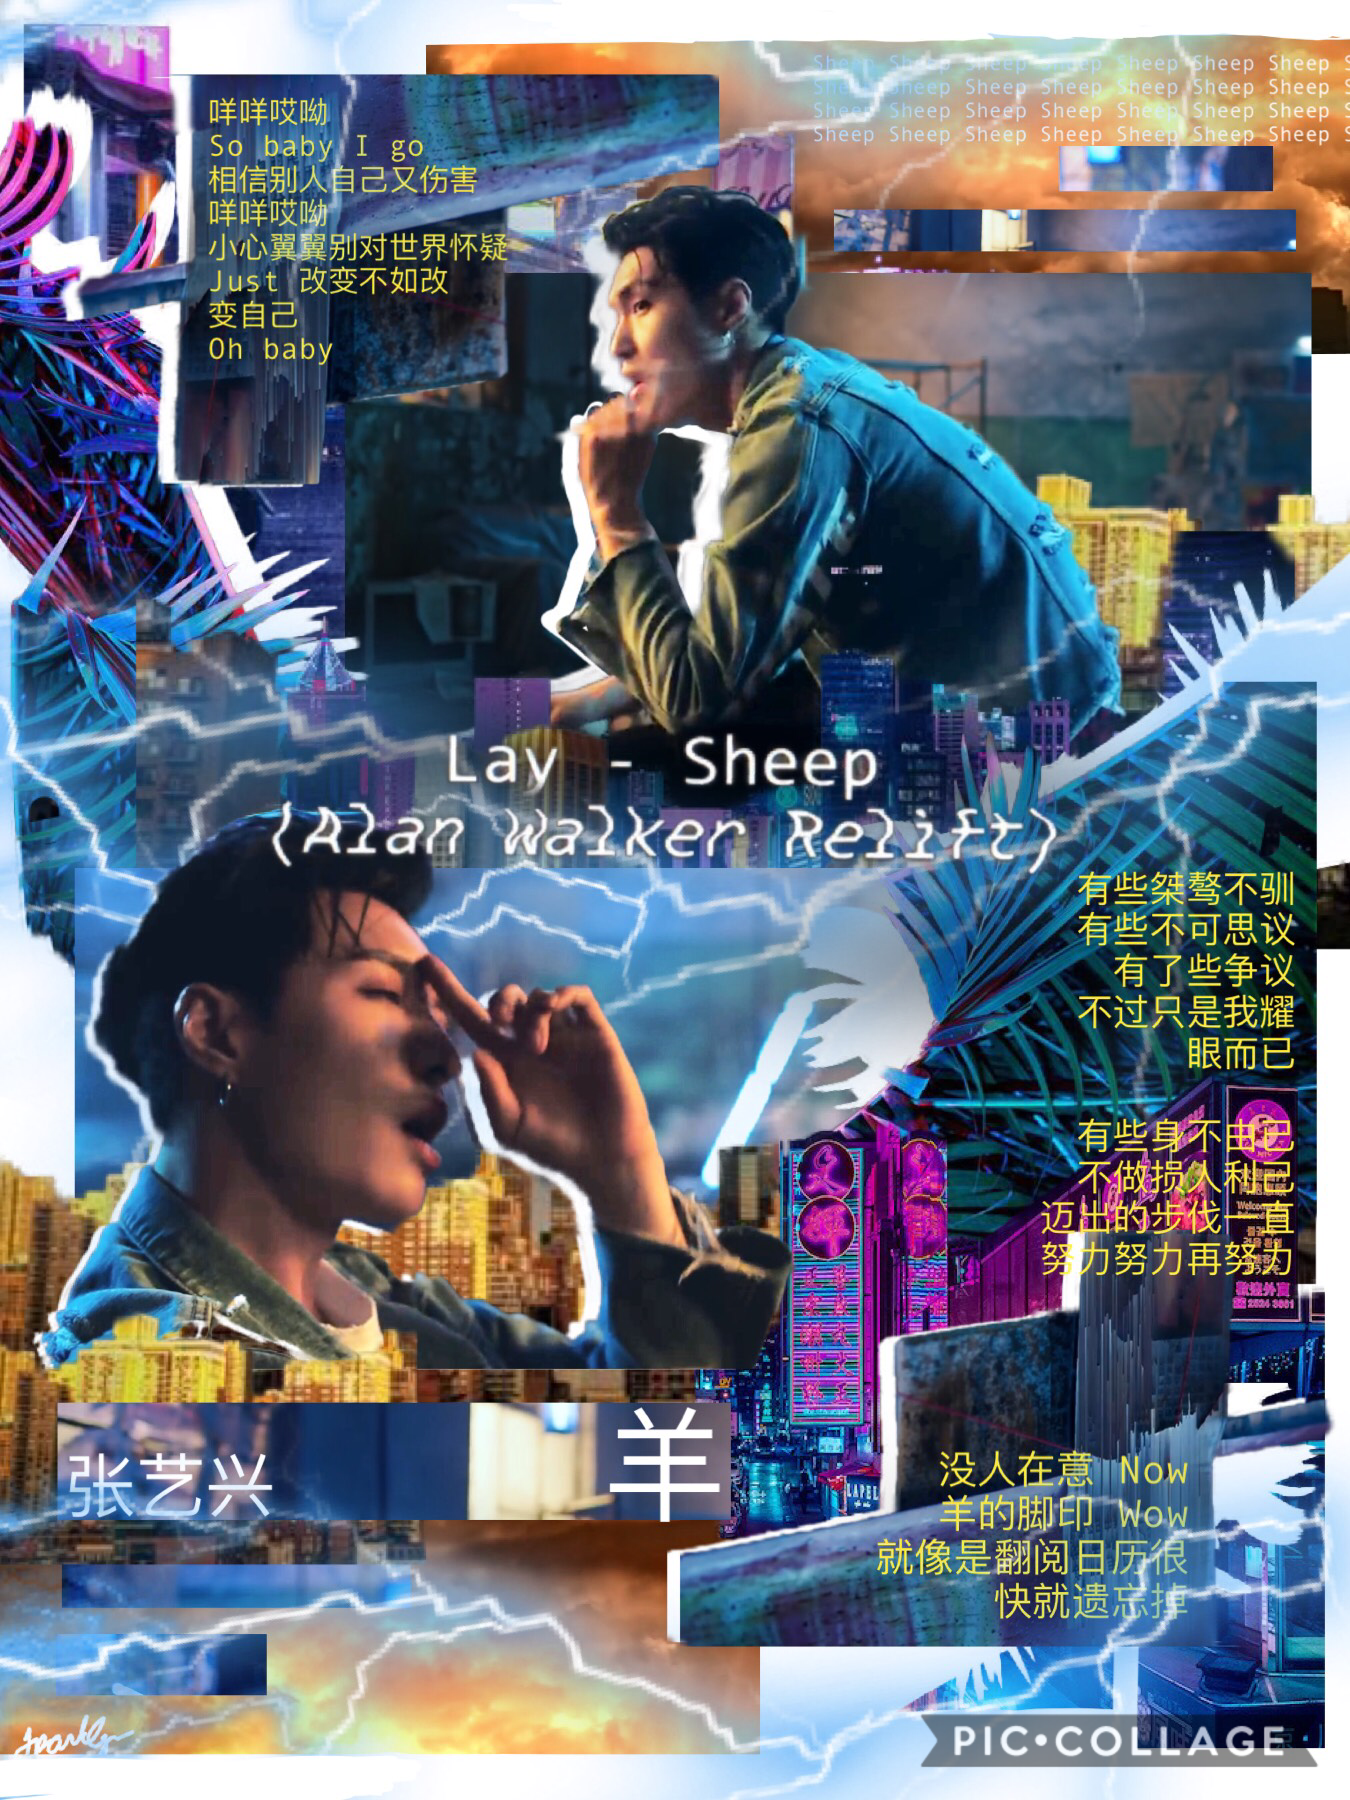 This took me FOREVER but it was worth it
Relift or not, Lay slayed 🔥🔥🔥🔥